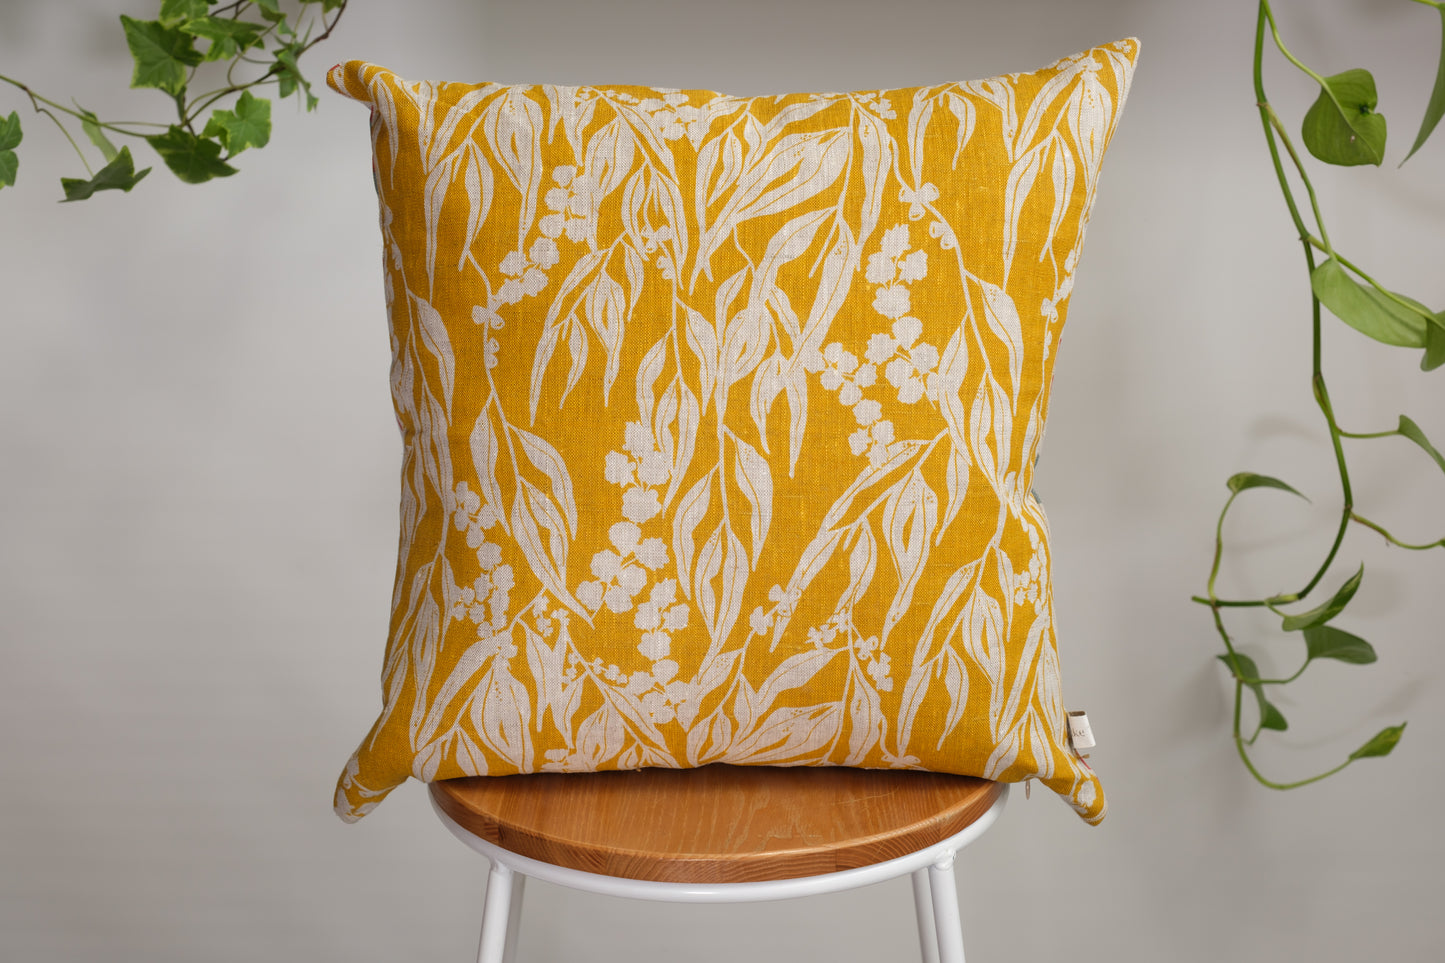 Linen Cushion Cover Featuring Nuts about Wattle and Mixed Wattle